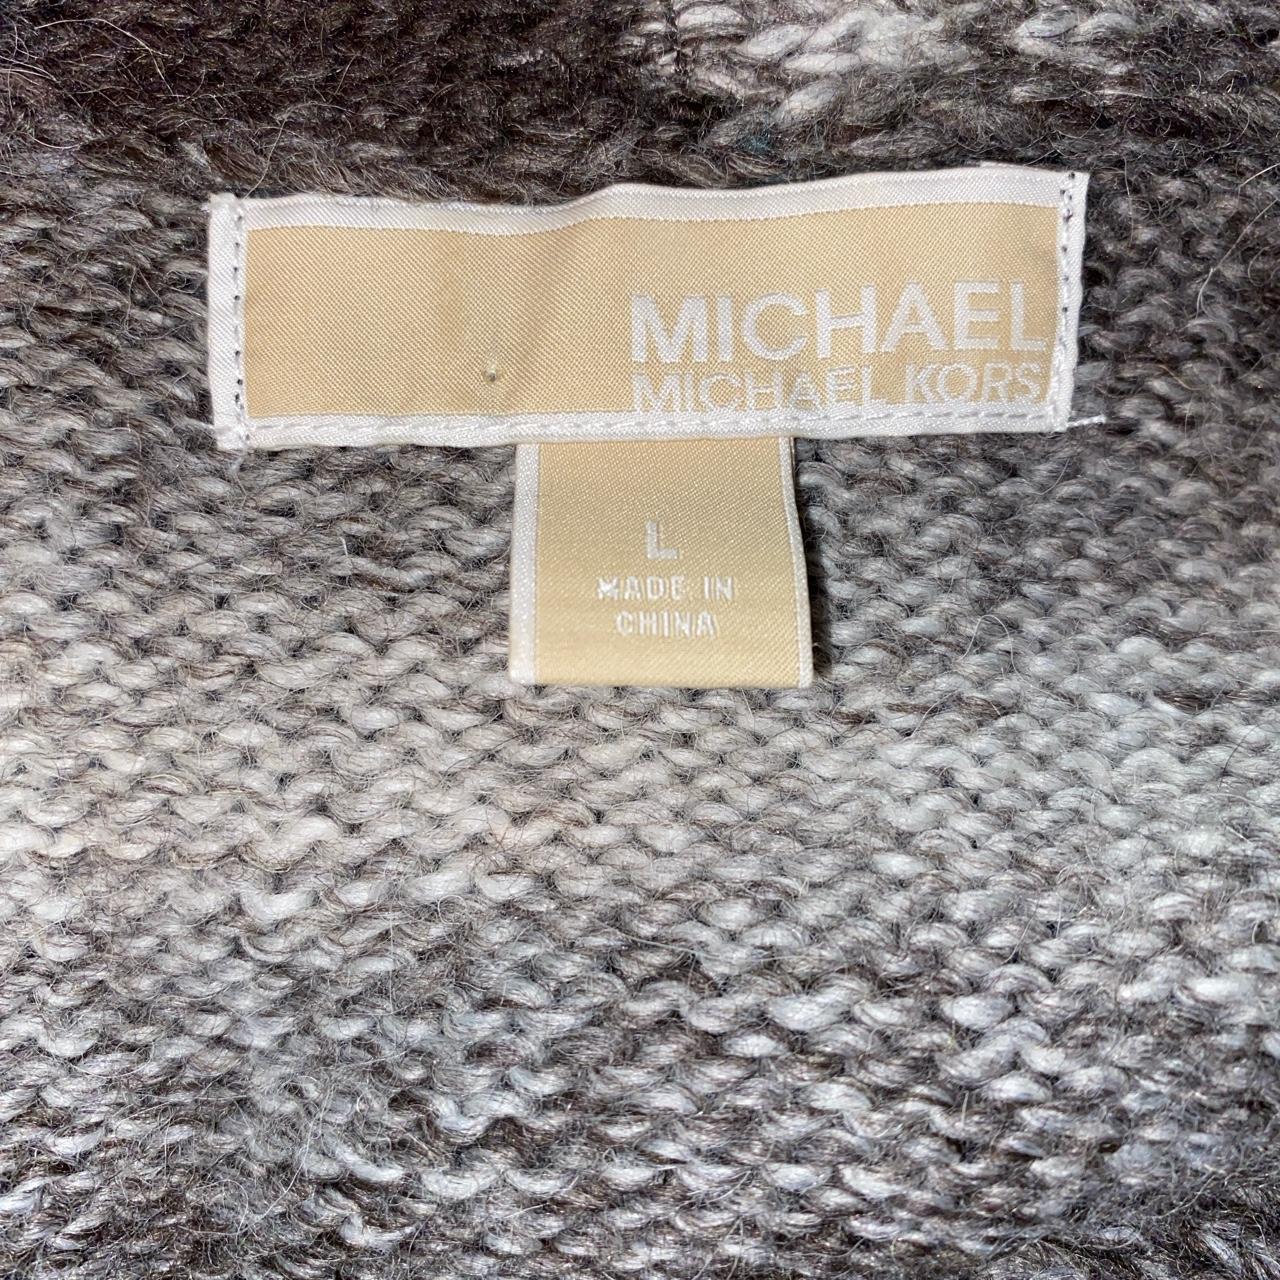 !! MICHAEL KORS !! I genuinely love this piece, and... - Depop